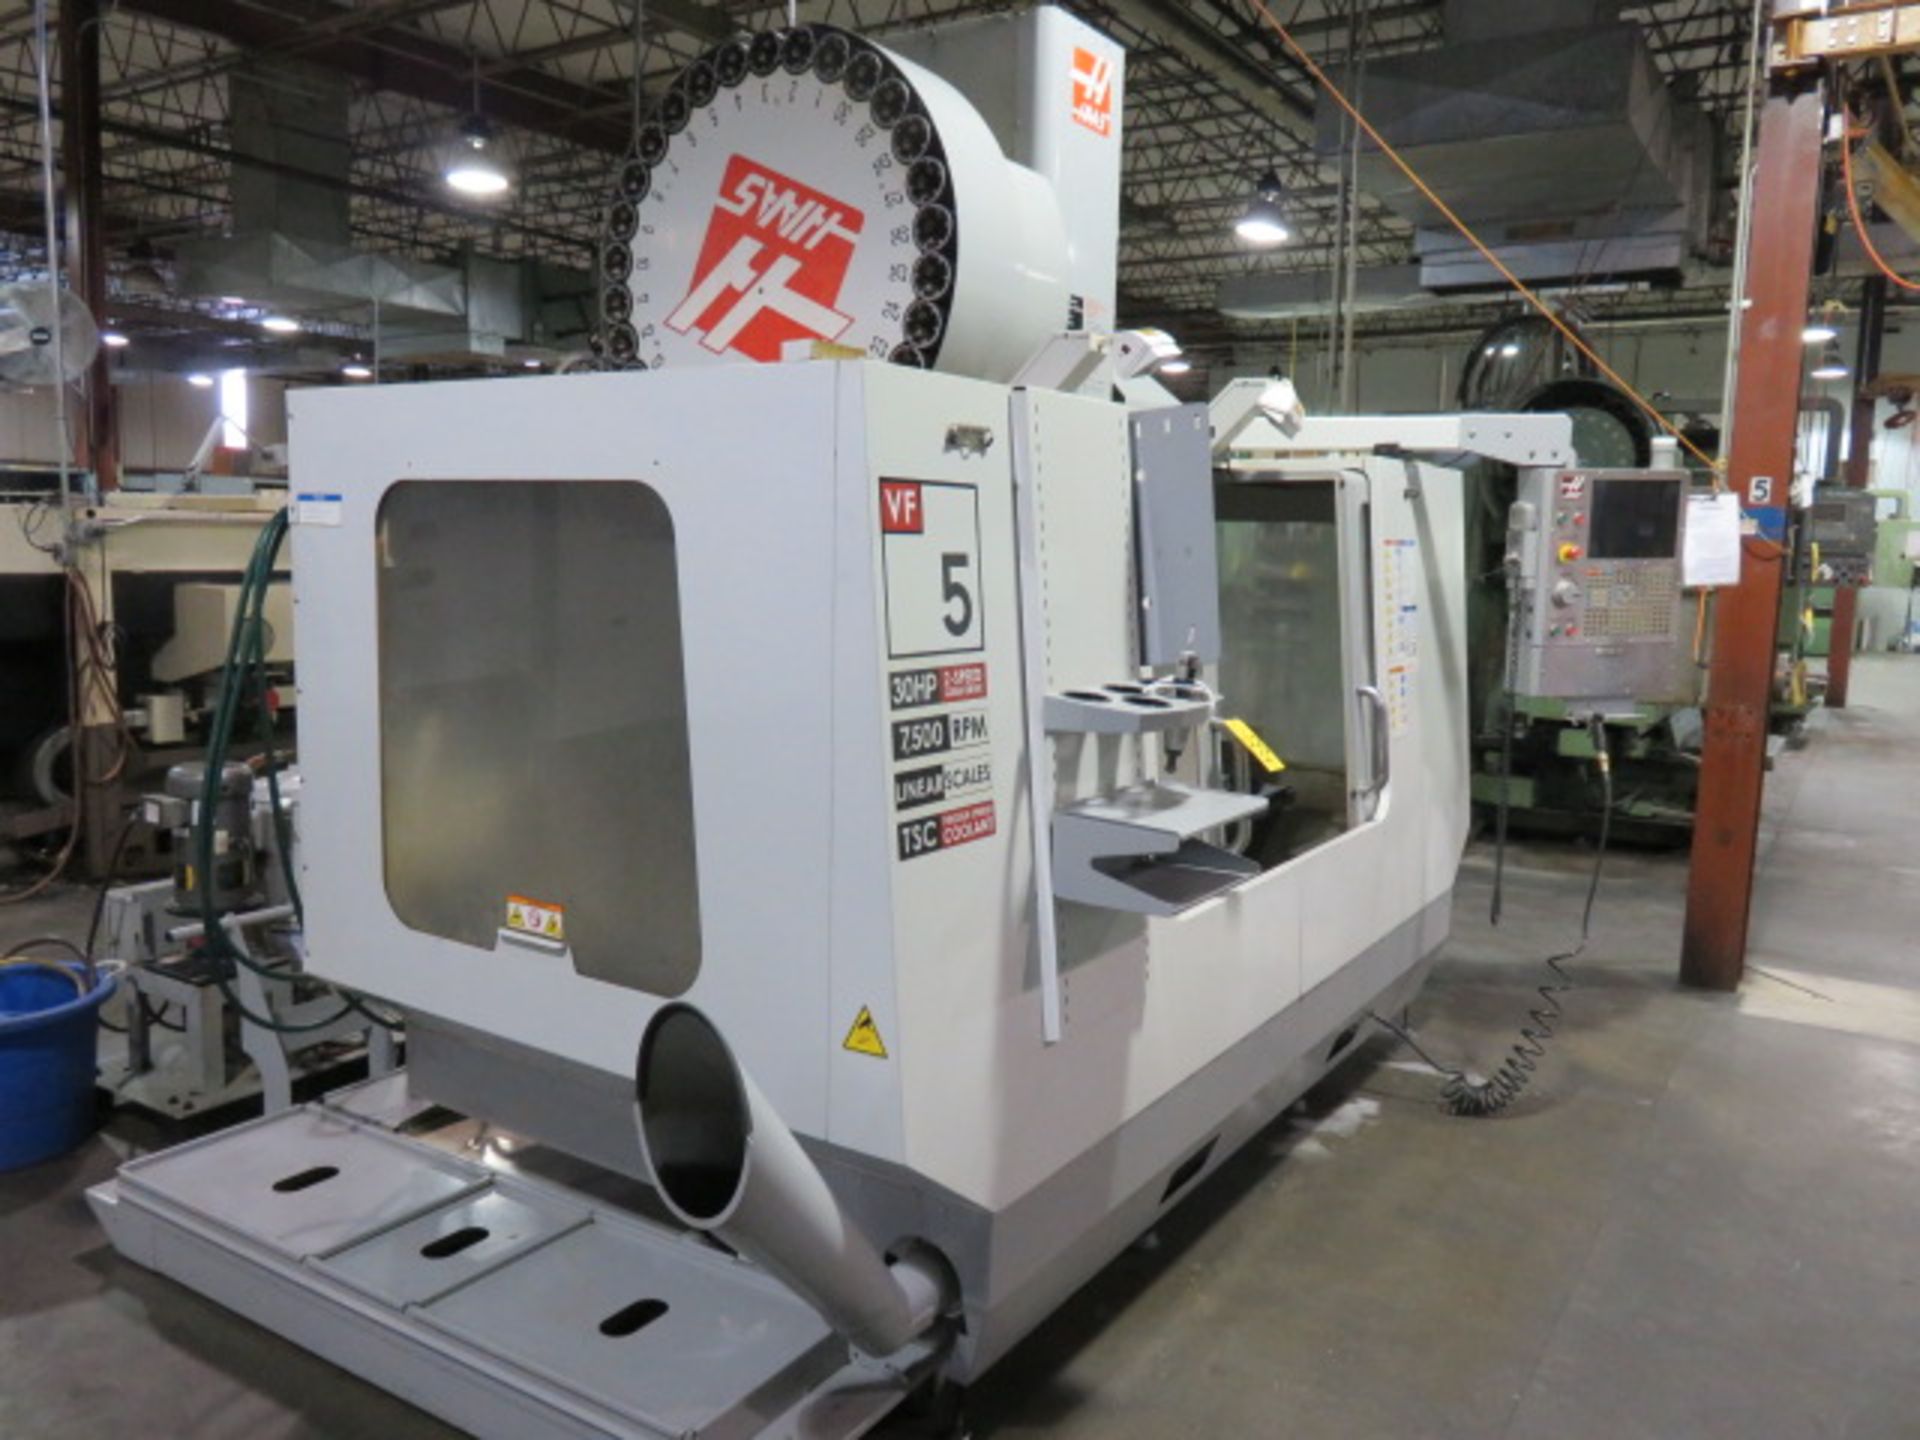 2007 HAAS VF-5/50 CNC VERTICAL MACHINING CENTER, S/N 1062010, 12,618 HOURS, (NEW SPNDL. 2012) - Image 5 of 6